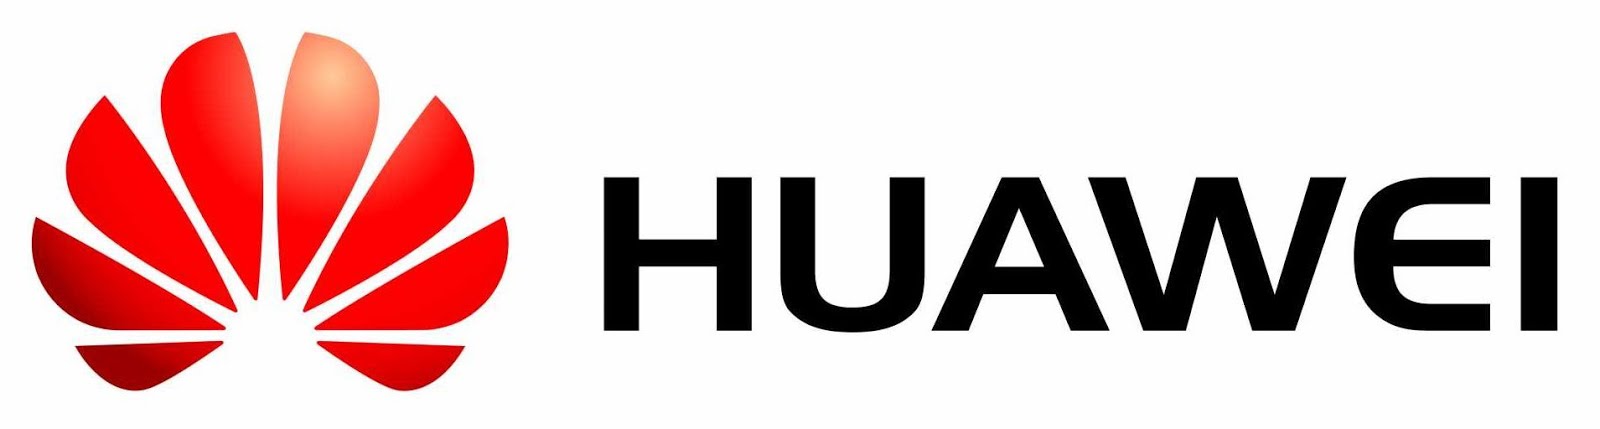 Huawei Coupons Promo Discount Codes